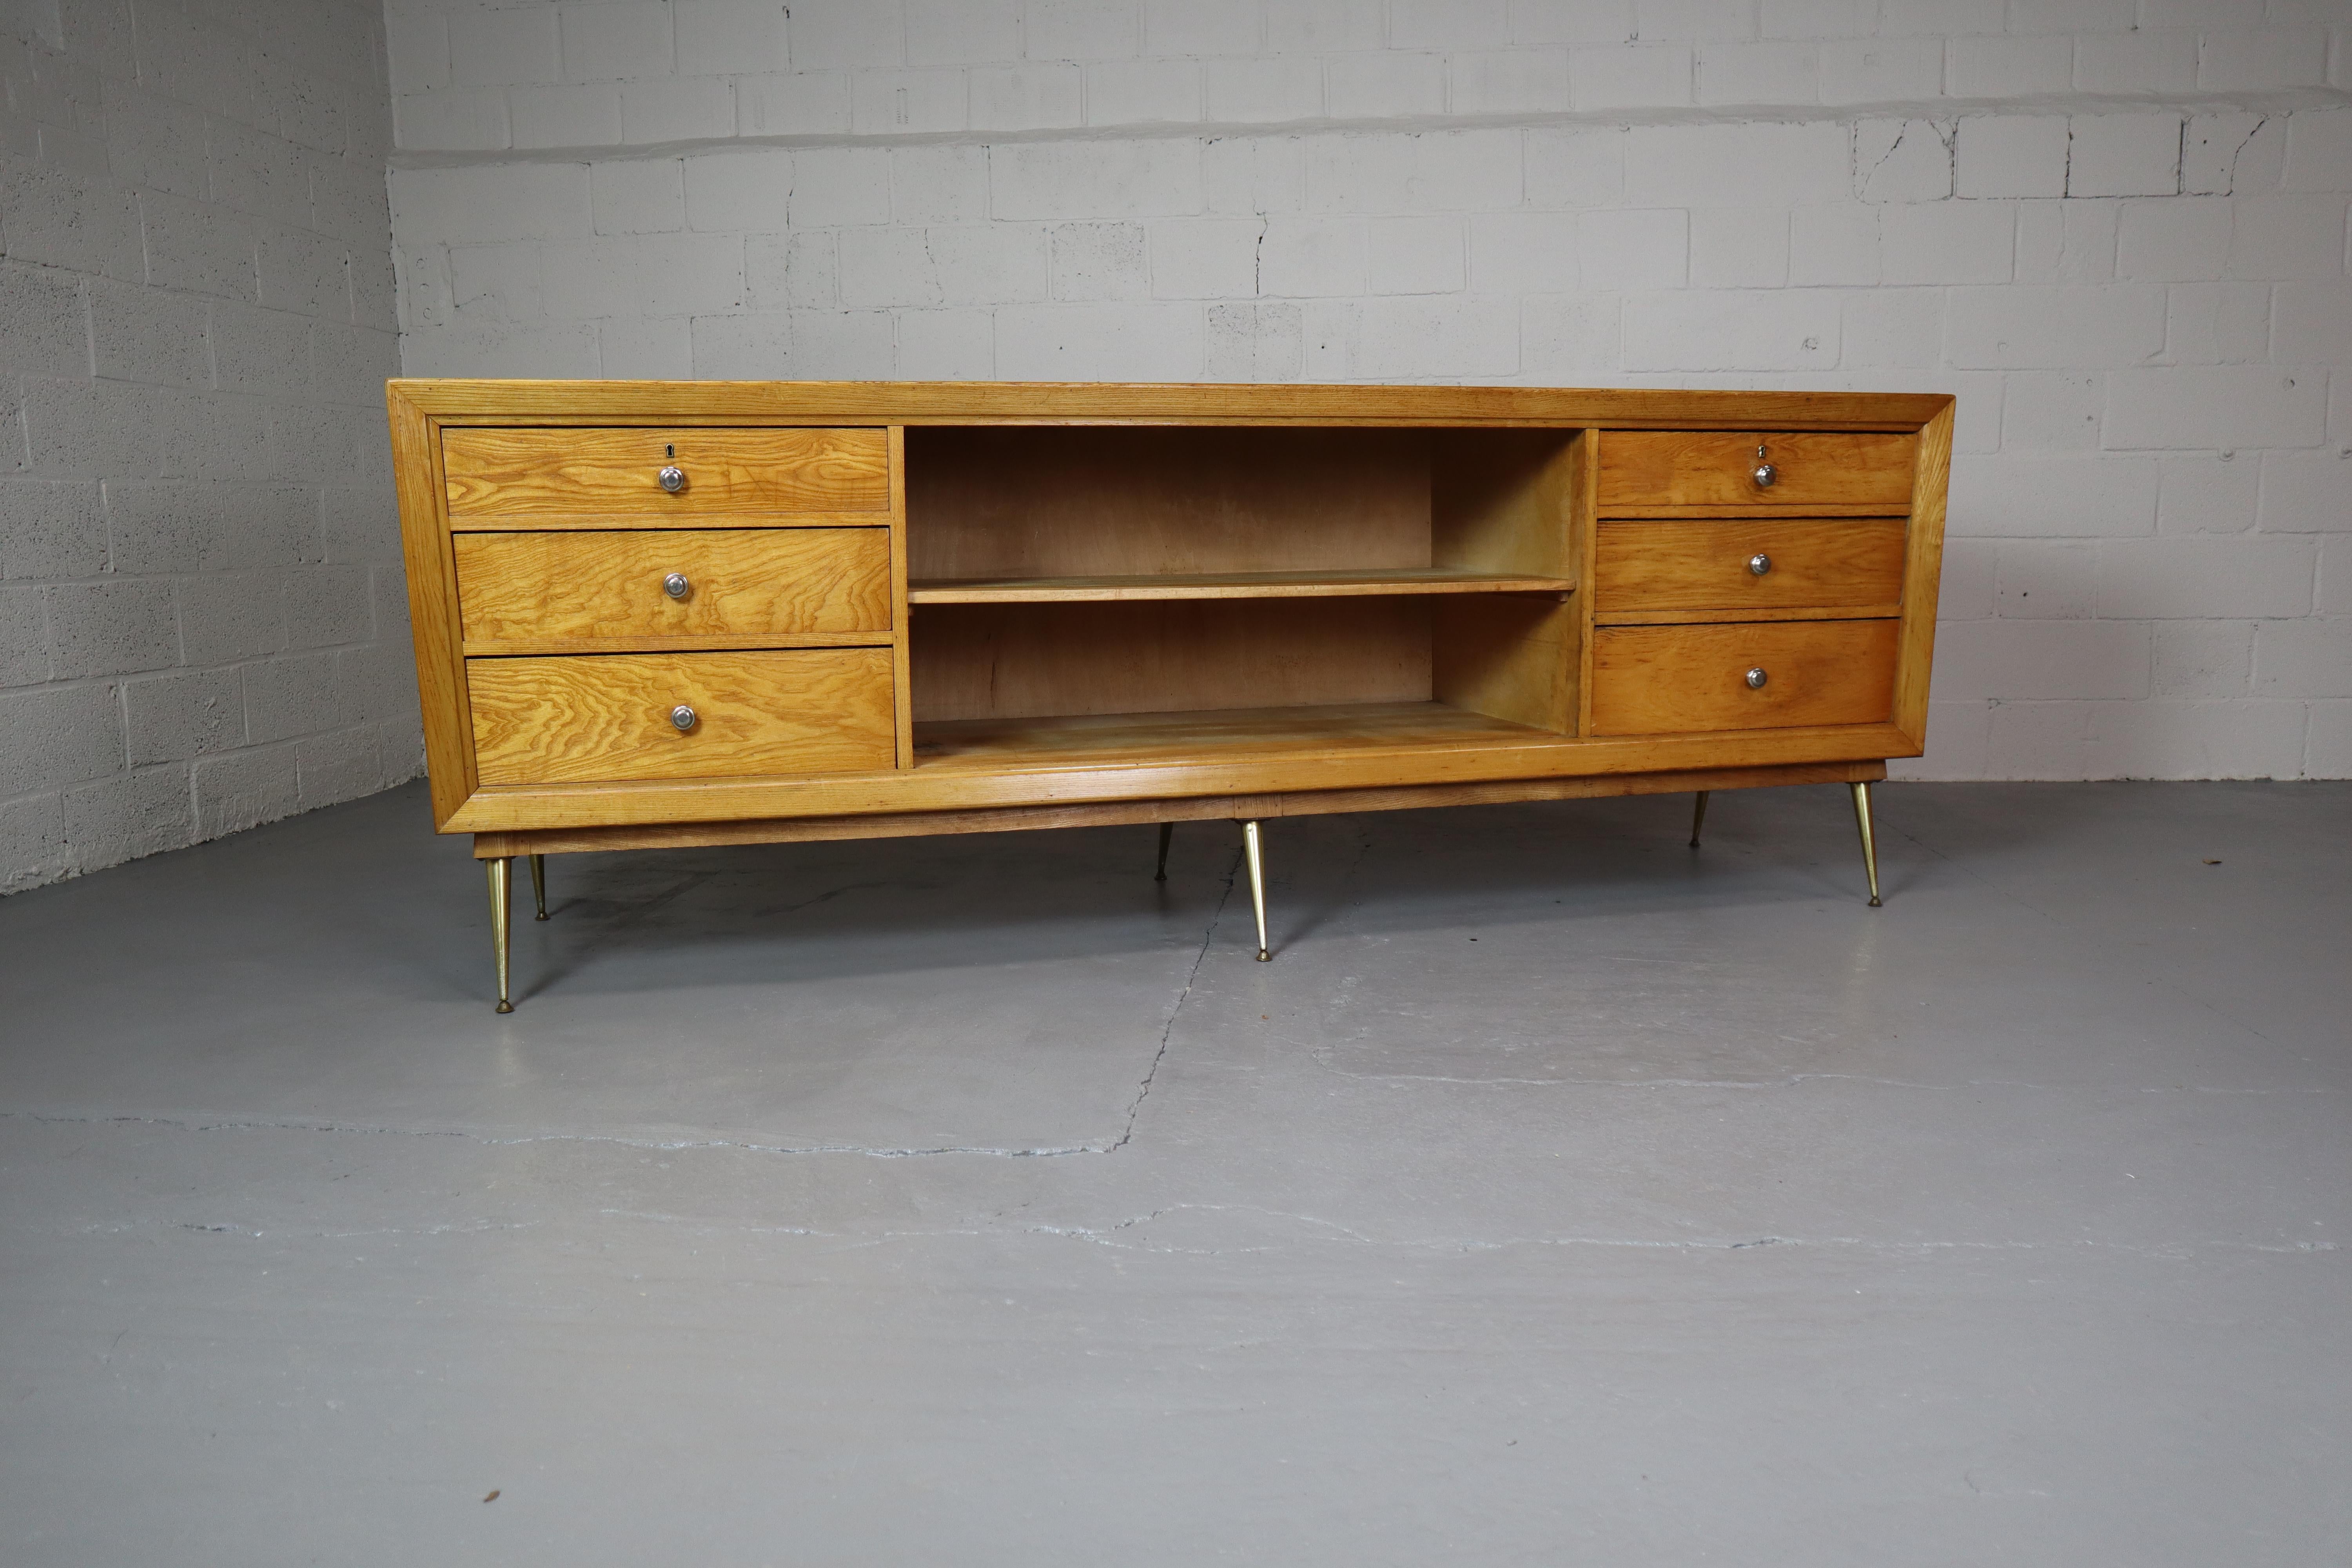 Stunning vintage shop counter with 6 big drawers and lots of storage space!
The counter is made of oak veneer.
The top has a formica finish.
Can be used perfectly as a sideboard or room divider.
Measures: W 244 H 89 D 70 cm.